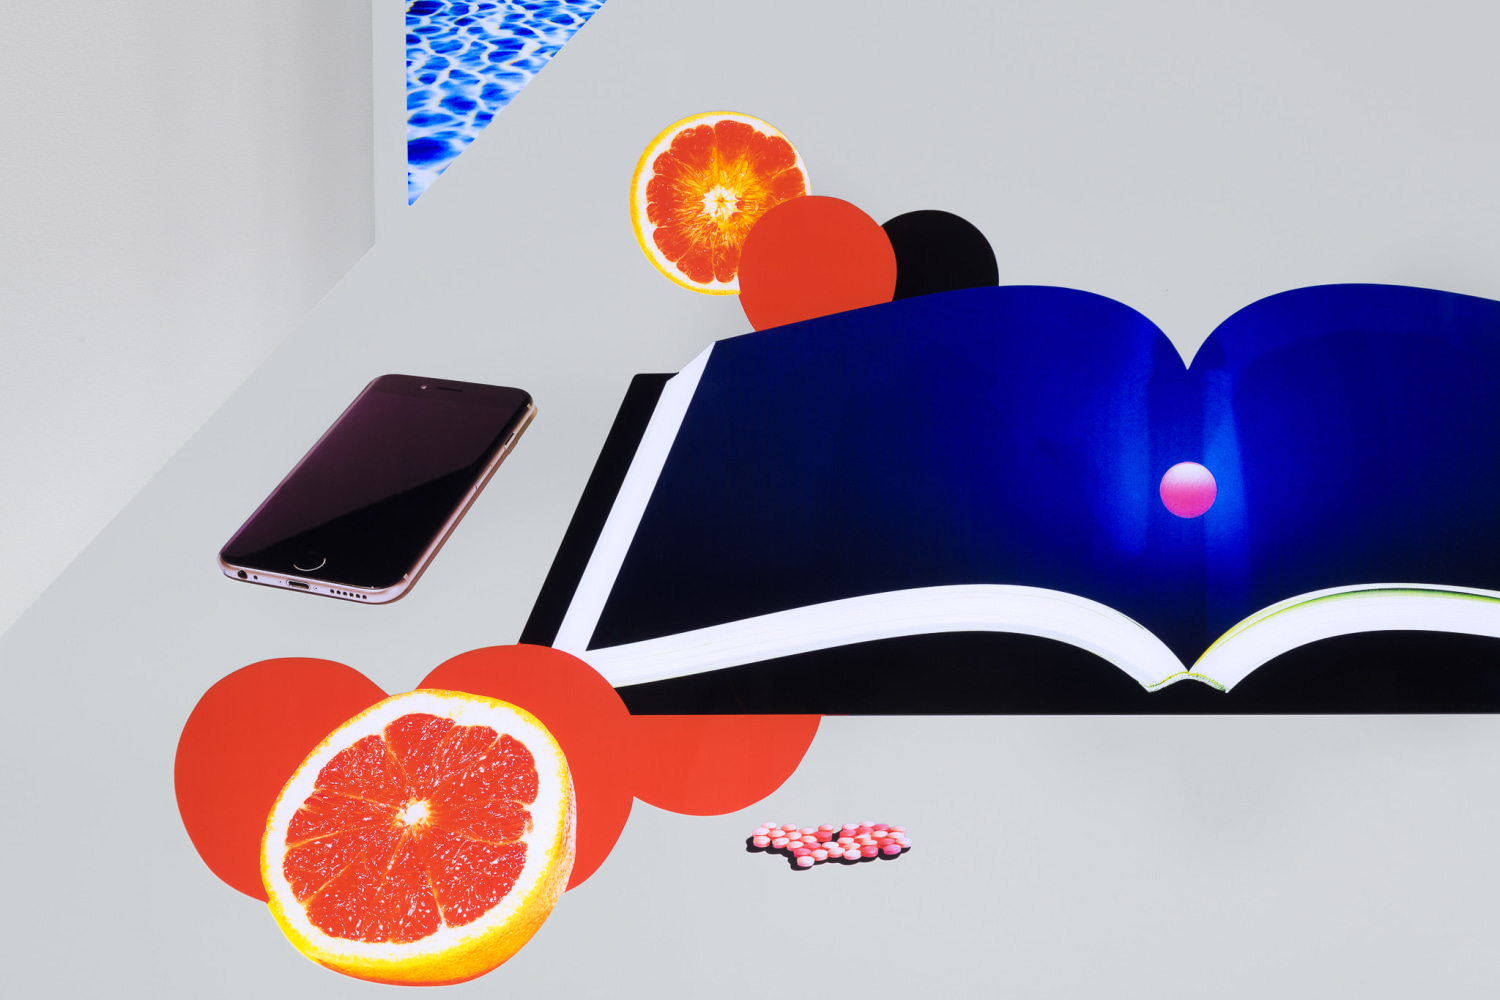 Doug Aitken

Still Life with Setting Sun

2020

Chromogenic transparency on acrylic in aluminum lightbox with LEDs

59 3/4 x 108 x 7 inches (151.8 x 274.3 x 17.8 cm)

Edition 1 of 4, with 2 AP

DA 636

$225,000

&amp;nbsp;

INQUIRE